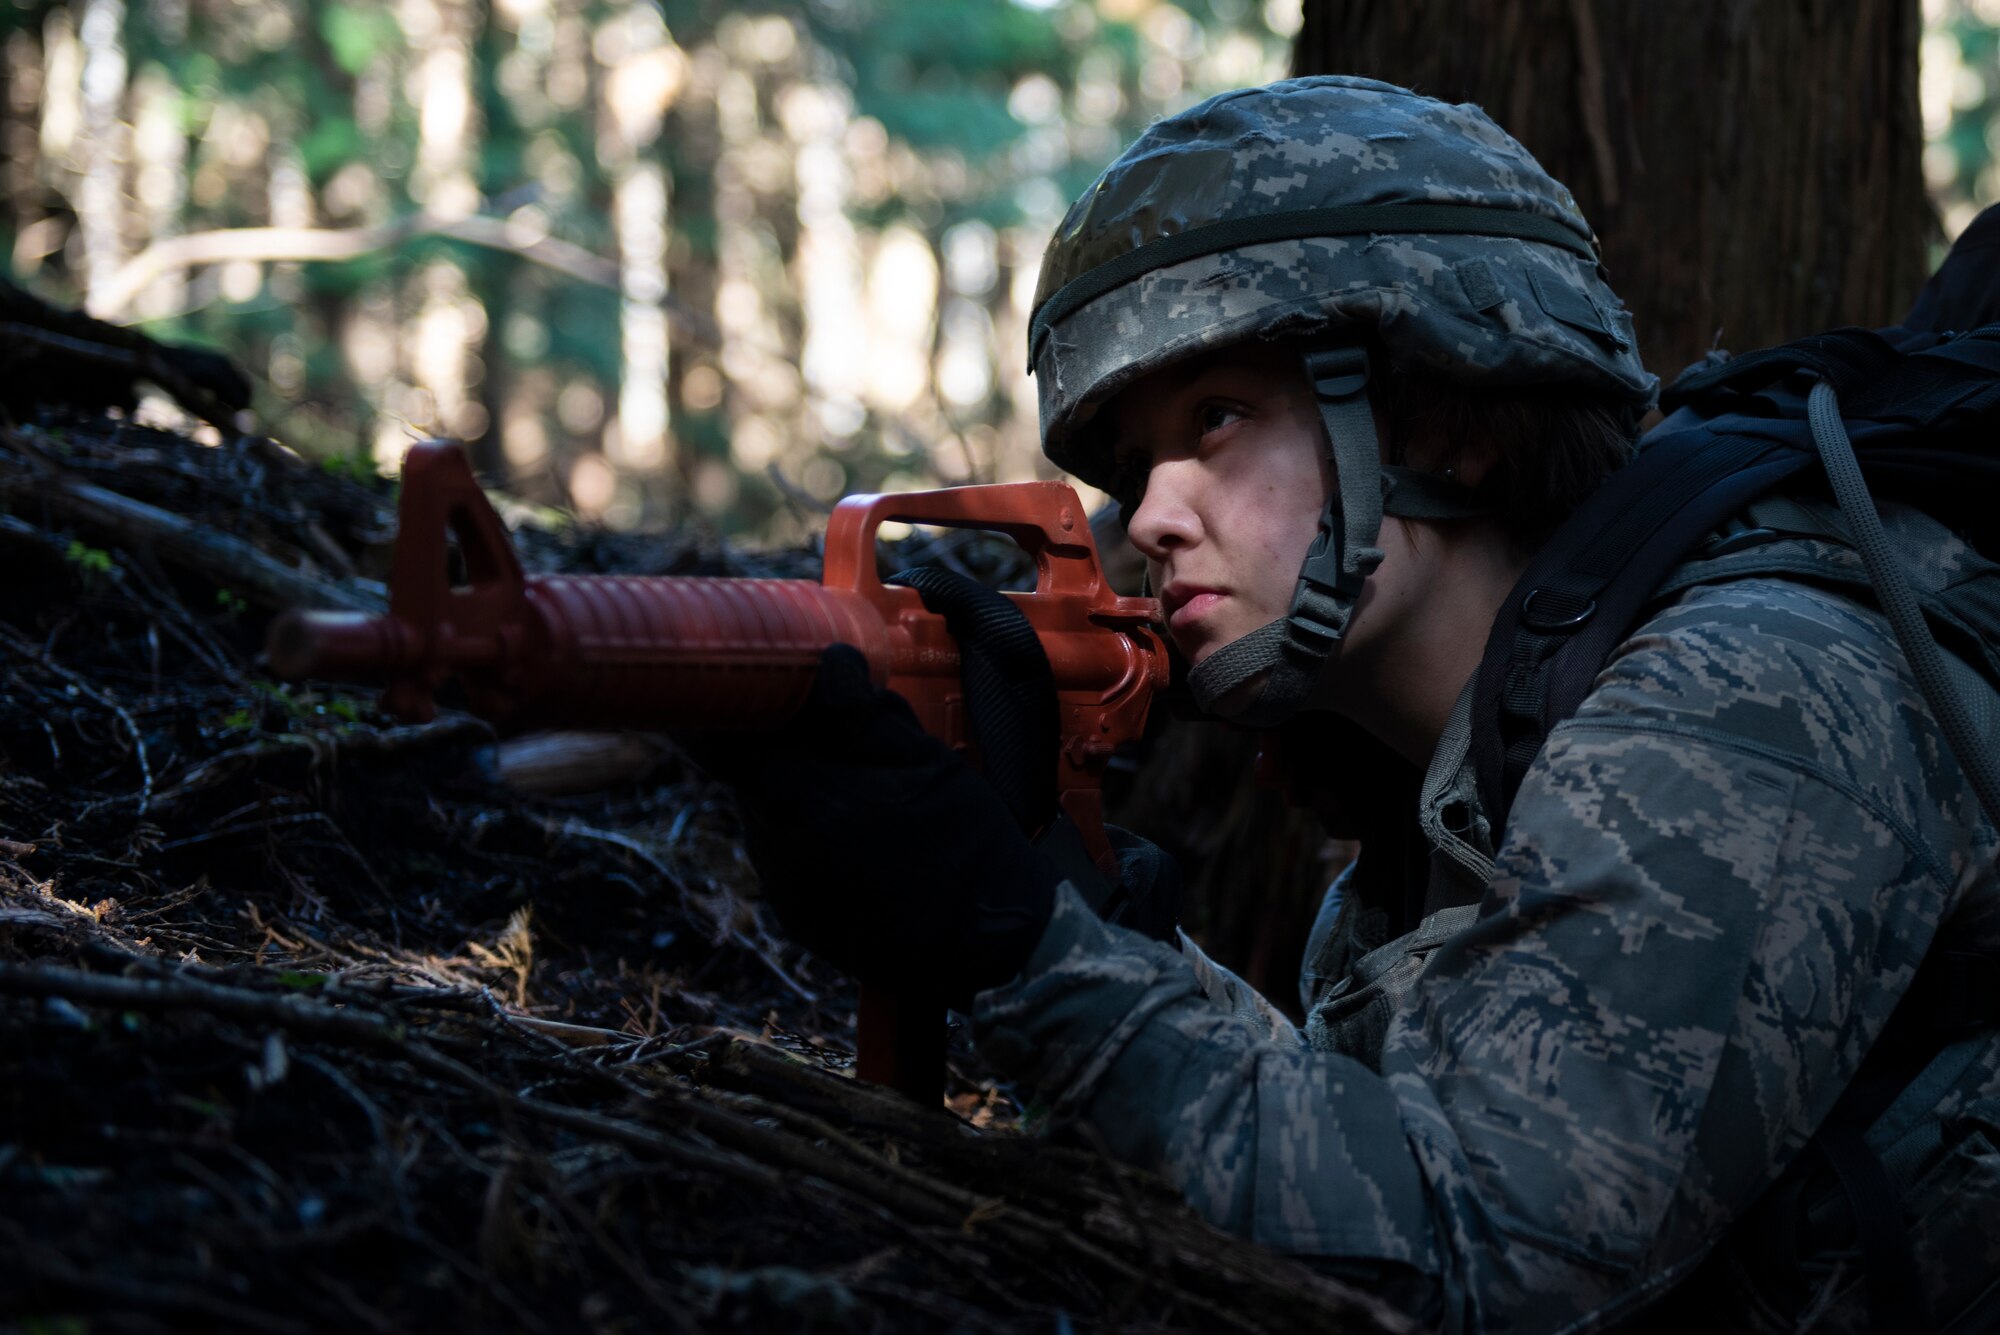 An Airman with the 374th Security Forces Squadron focuses on their area of responsibility for team security during a field training exercise at Yokota Air Base, Japan, Nov. 8, 2018.